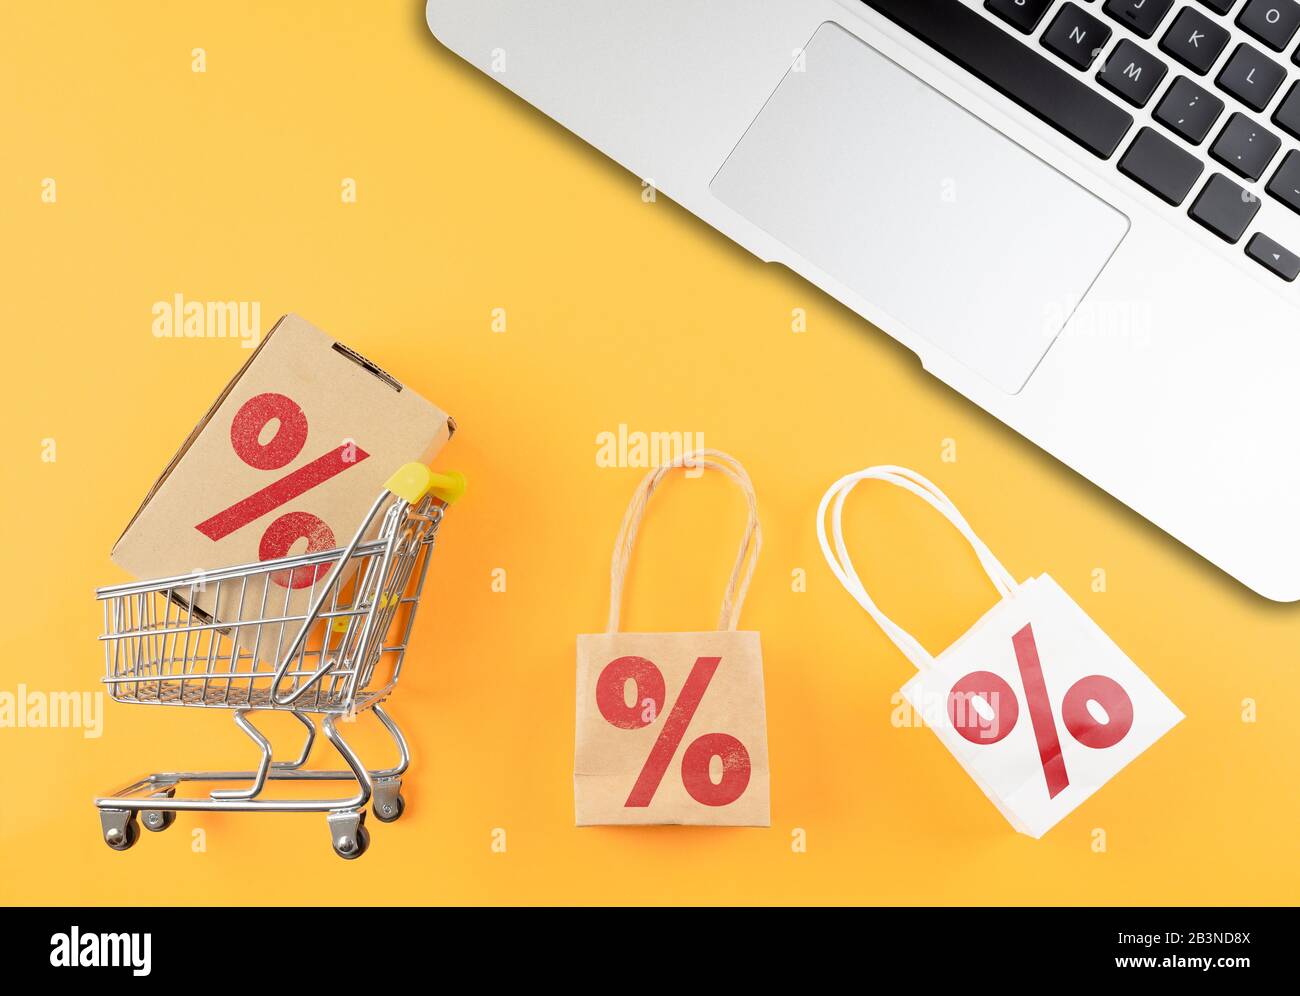 online shopping and e-commerce concept with shopping cart and laptop computer on orange desk Stock Photo